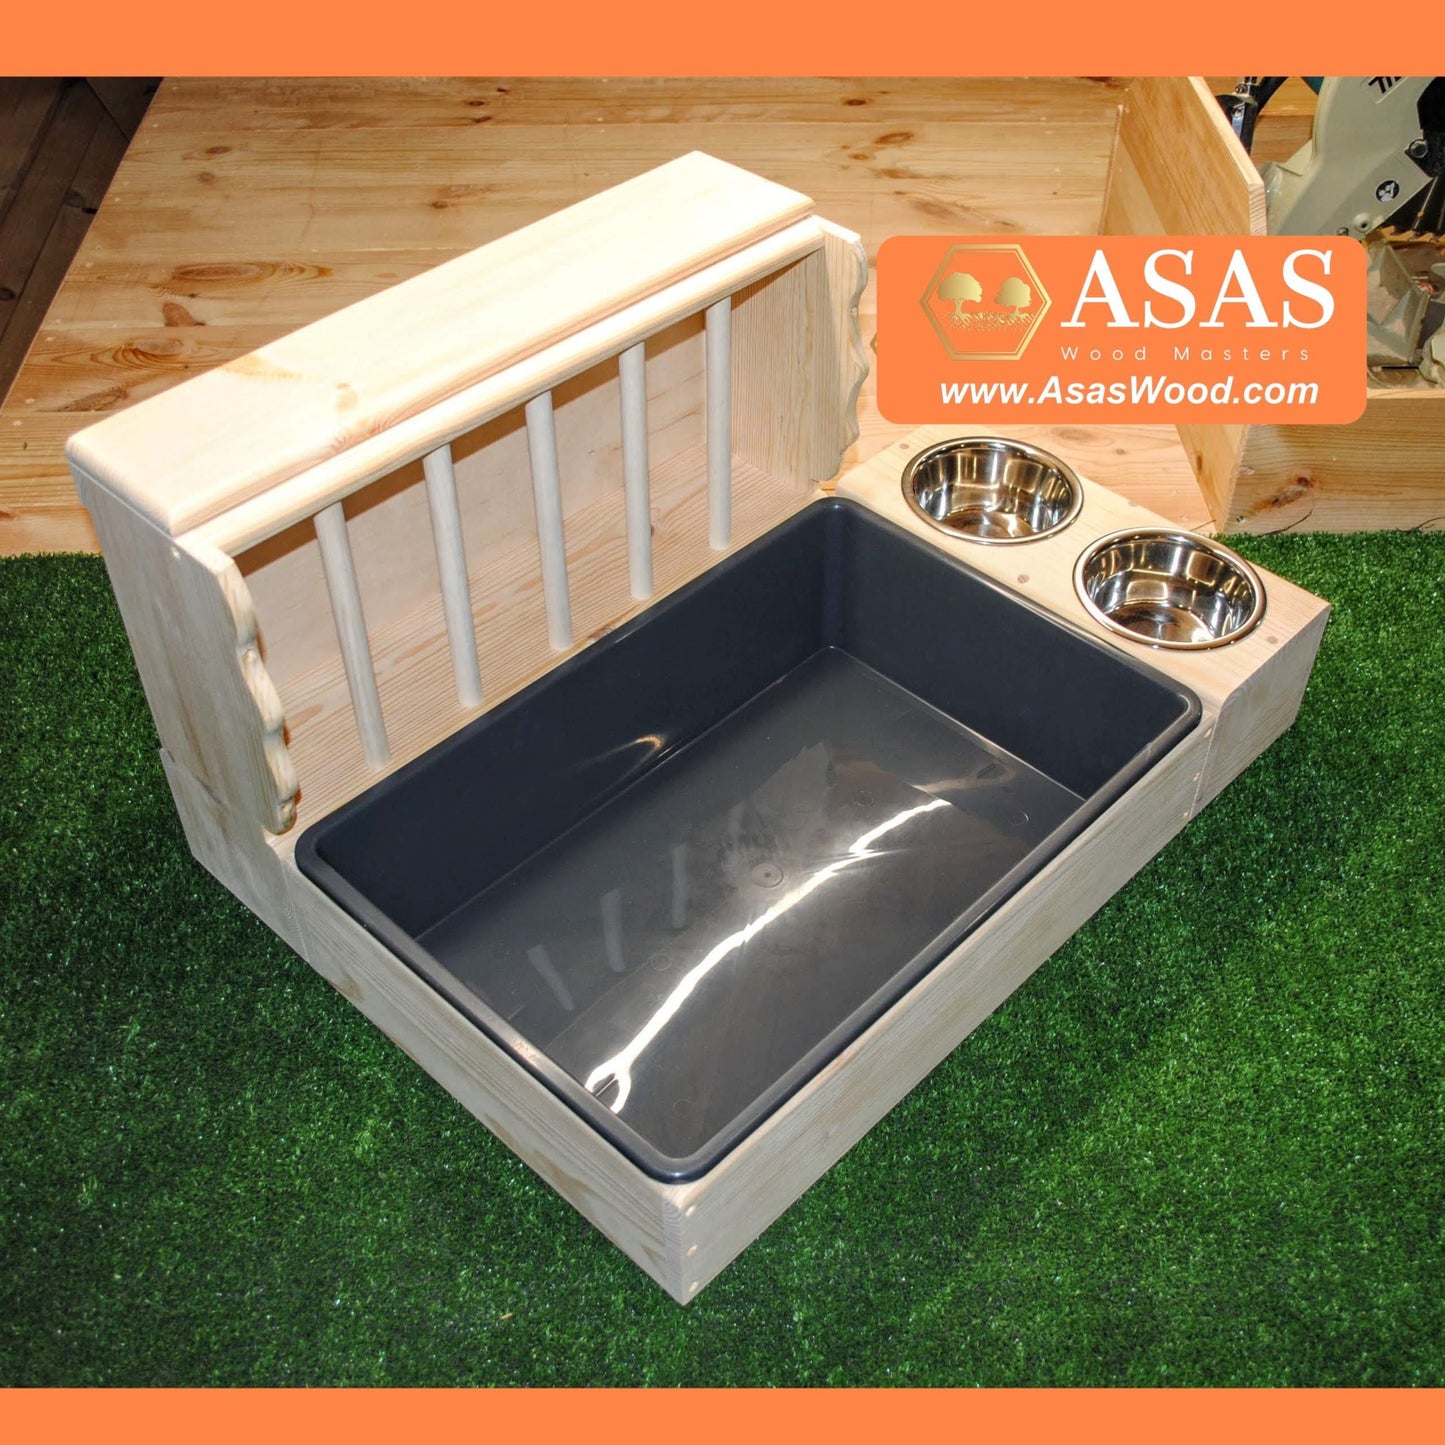 Rabbit hay feeder with litter box large size, dish stand with two metal bowls, made by asaswood